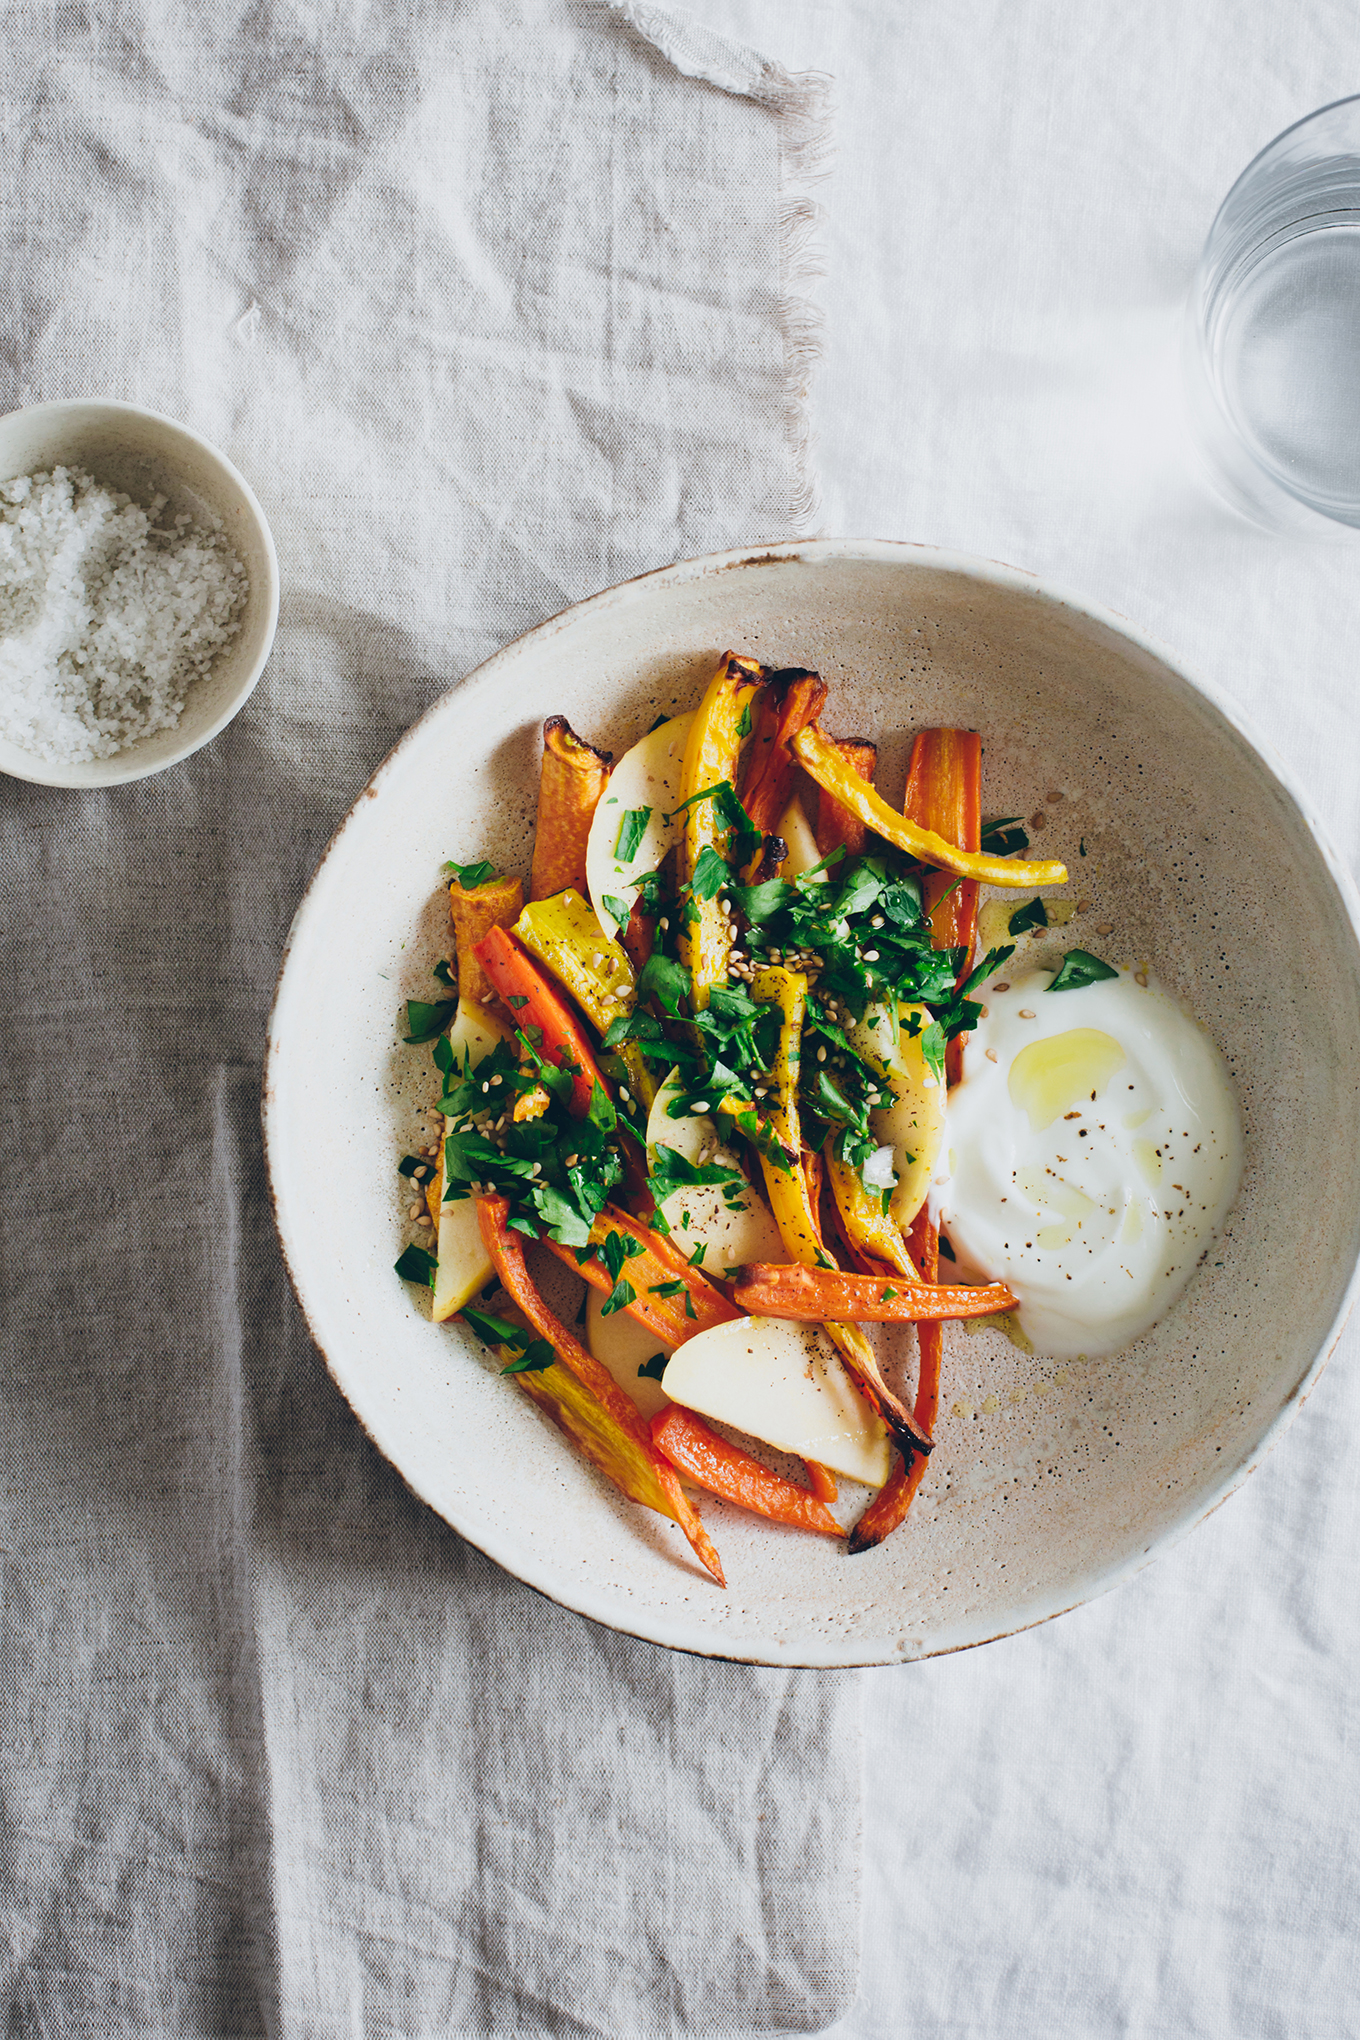 Apple and carrot salad - Carnets Parisiens